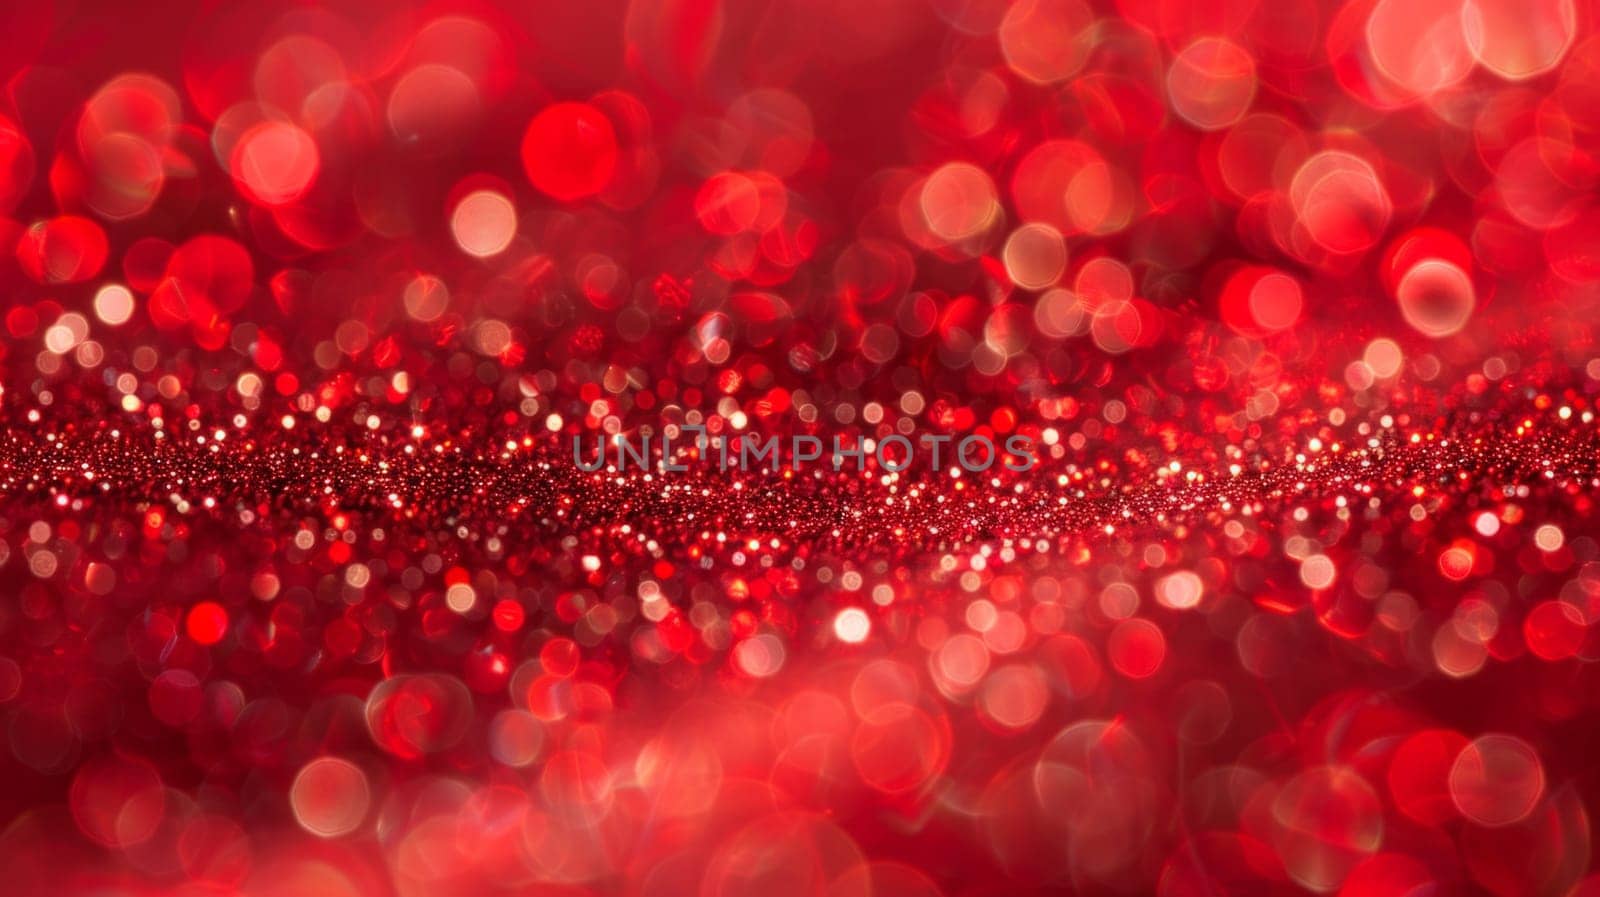 Red glitter glowing background.